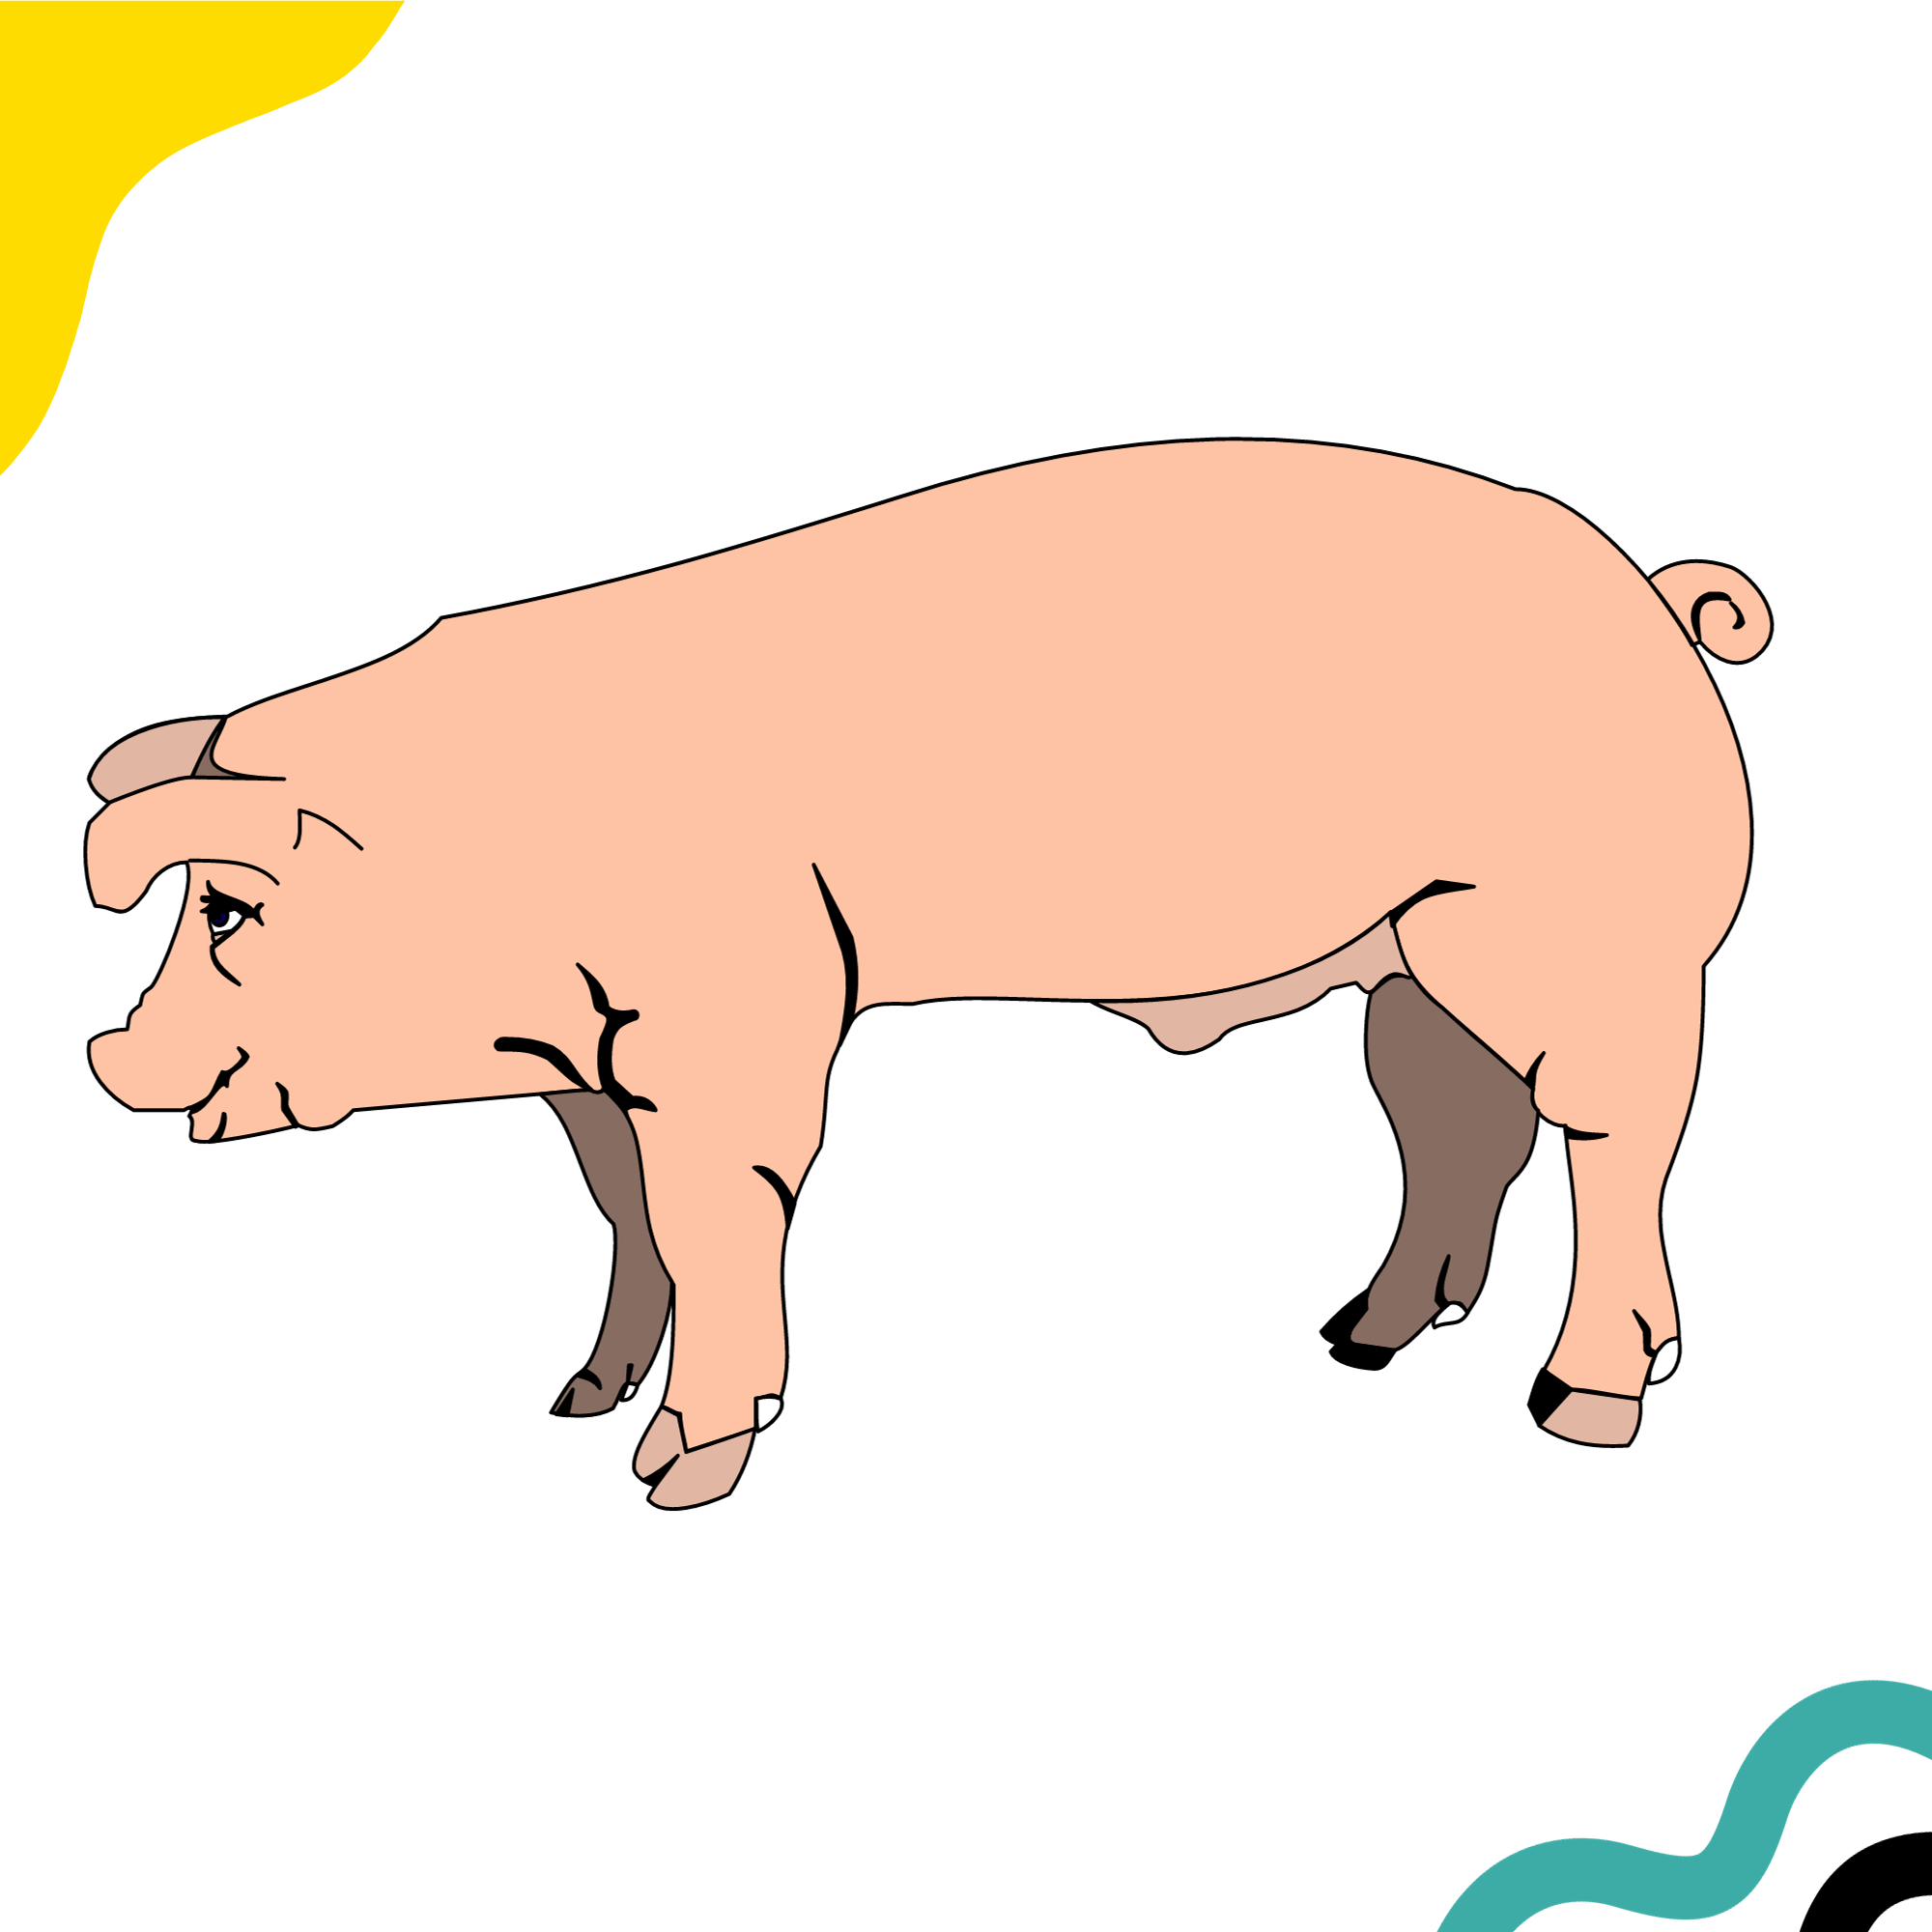 Visual demonstration of a pig, a great source of a dog food